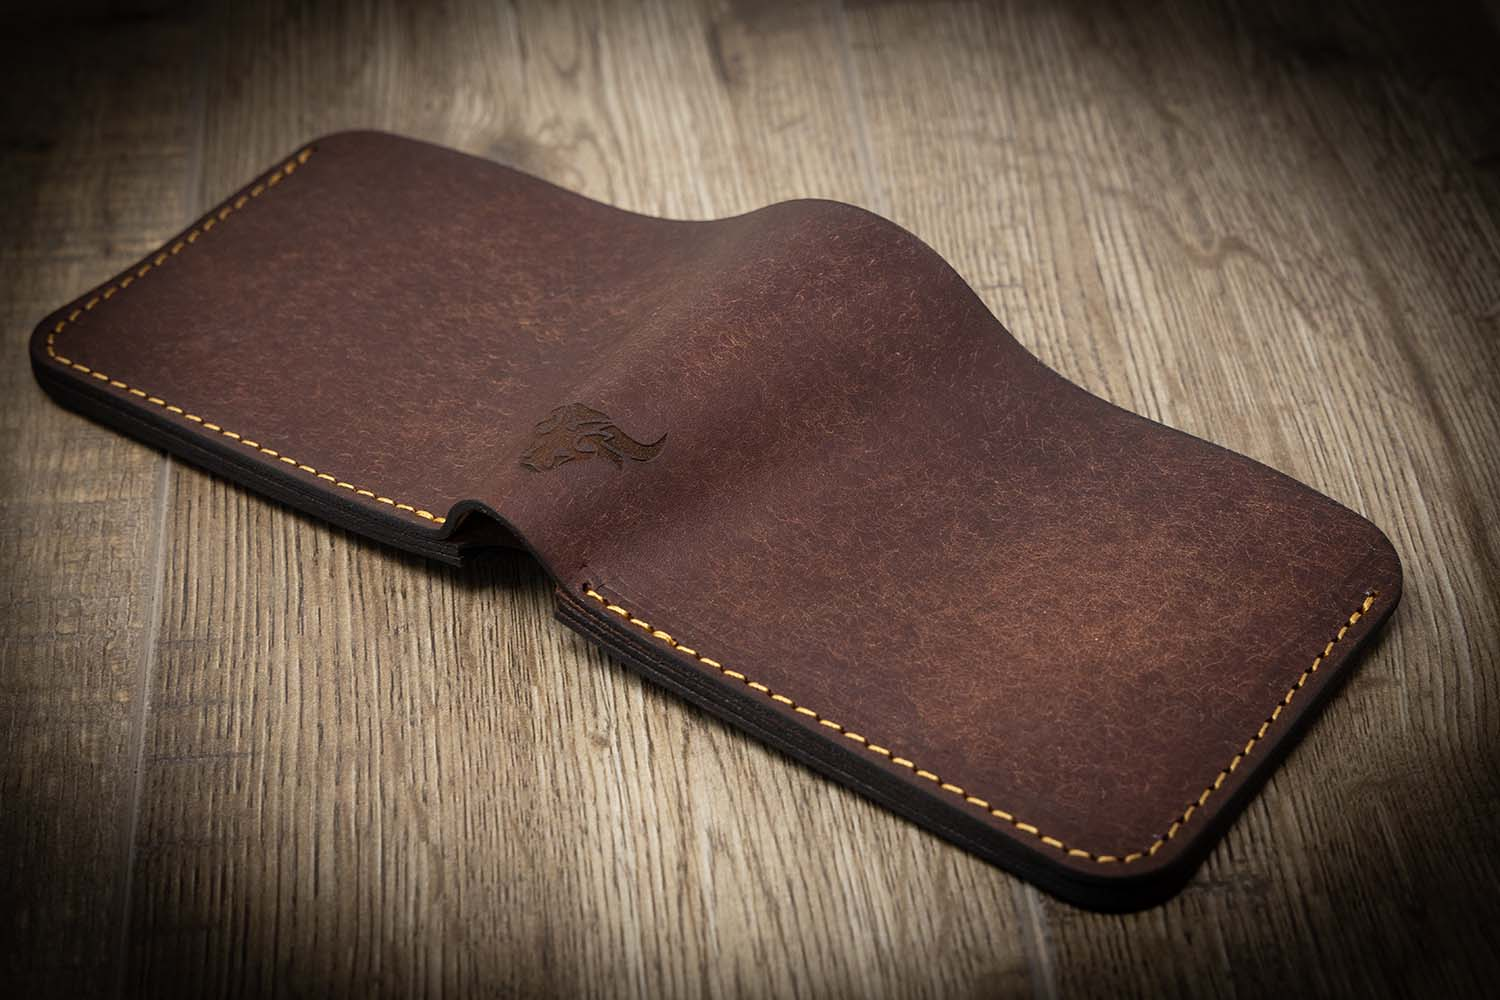 A leather bifold wallet with vegetable tanned leather and a pocket for cash.